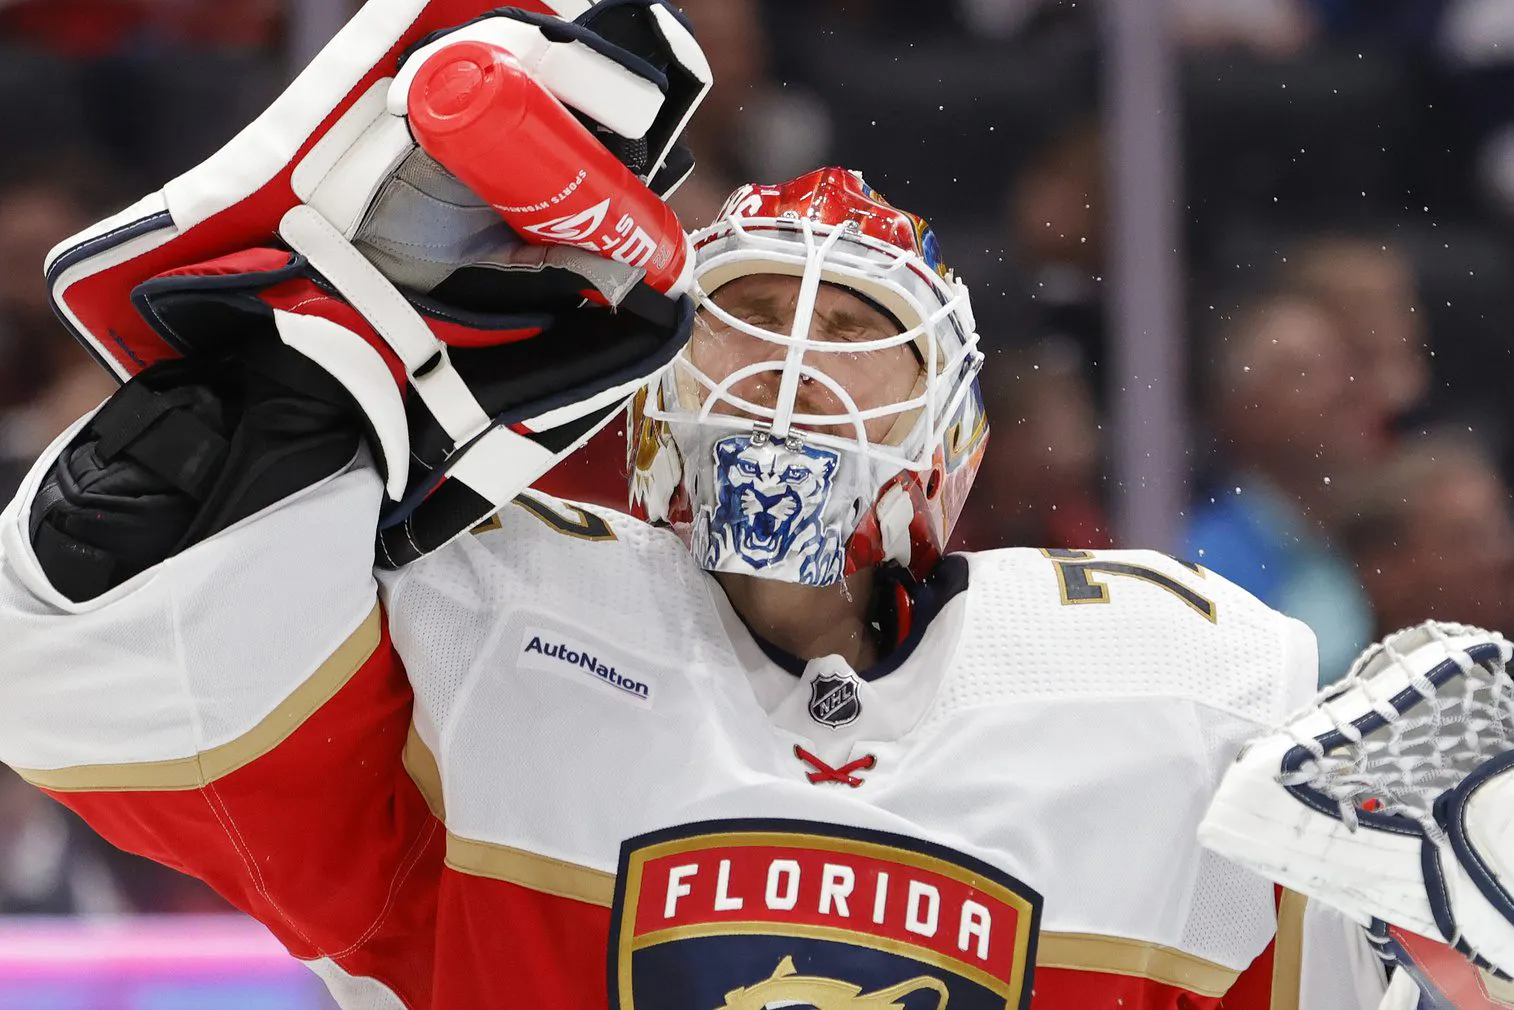 Betway starting goalie bet of the day: Bet on Sergei Bobrovsky to continue to give the Florida Panthers excellent goaltending